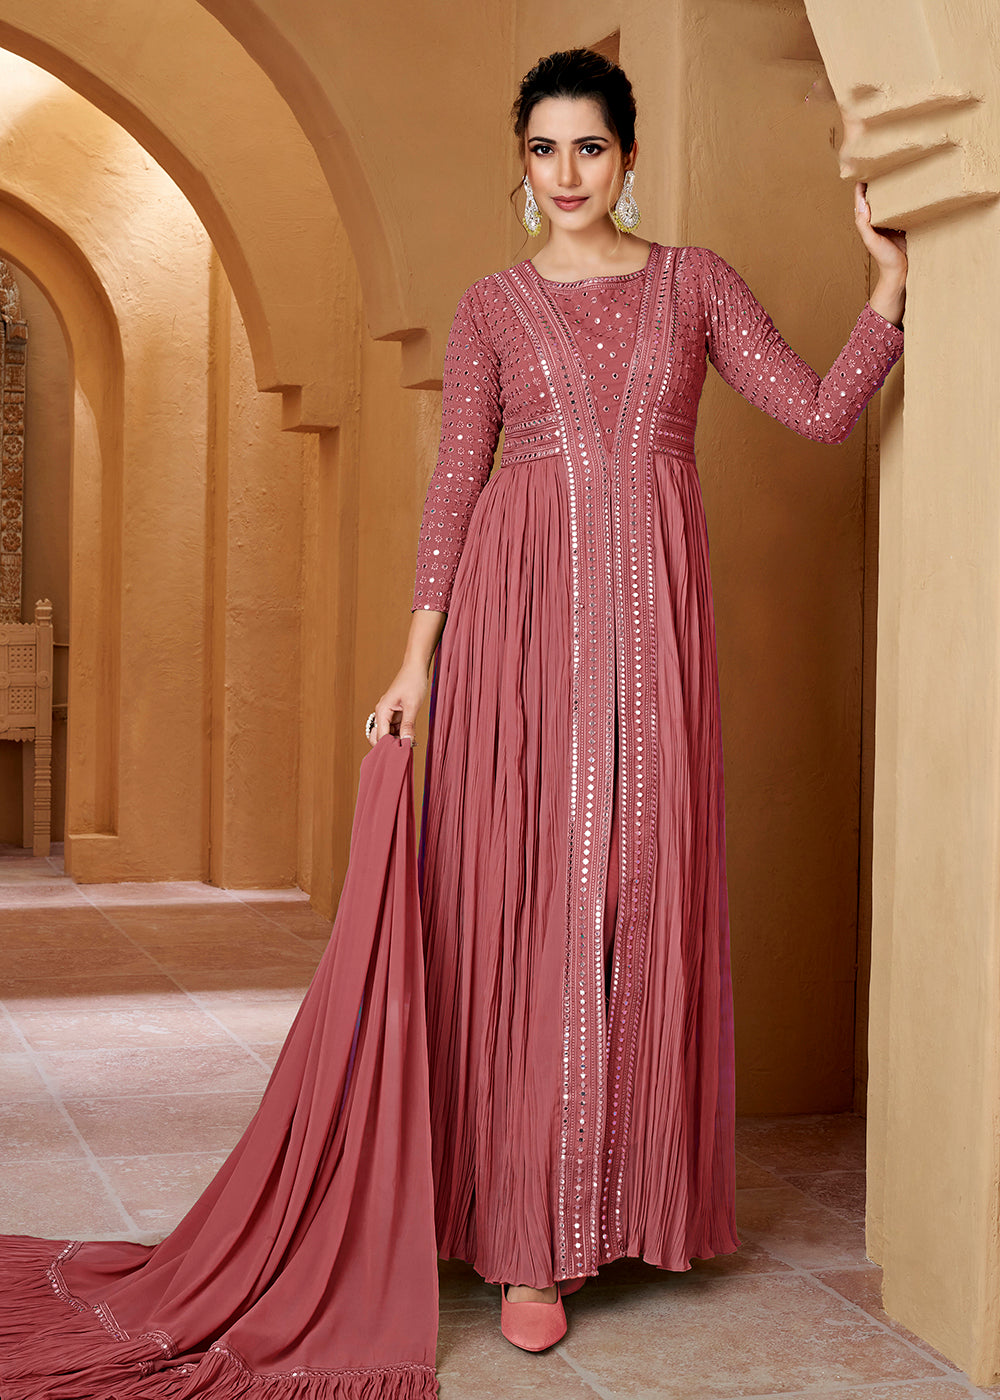 Buy Now Pink Crushed Georgette Mirror Lucknowi Work Anarkali Dress Online in USA, UK, Australia, New Zealand, Canada & Worldwide at Empress Clothing.